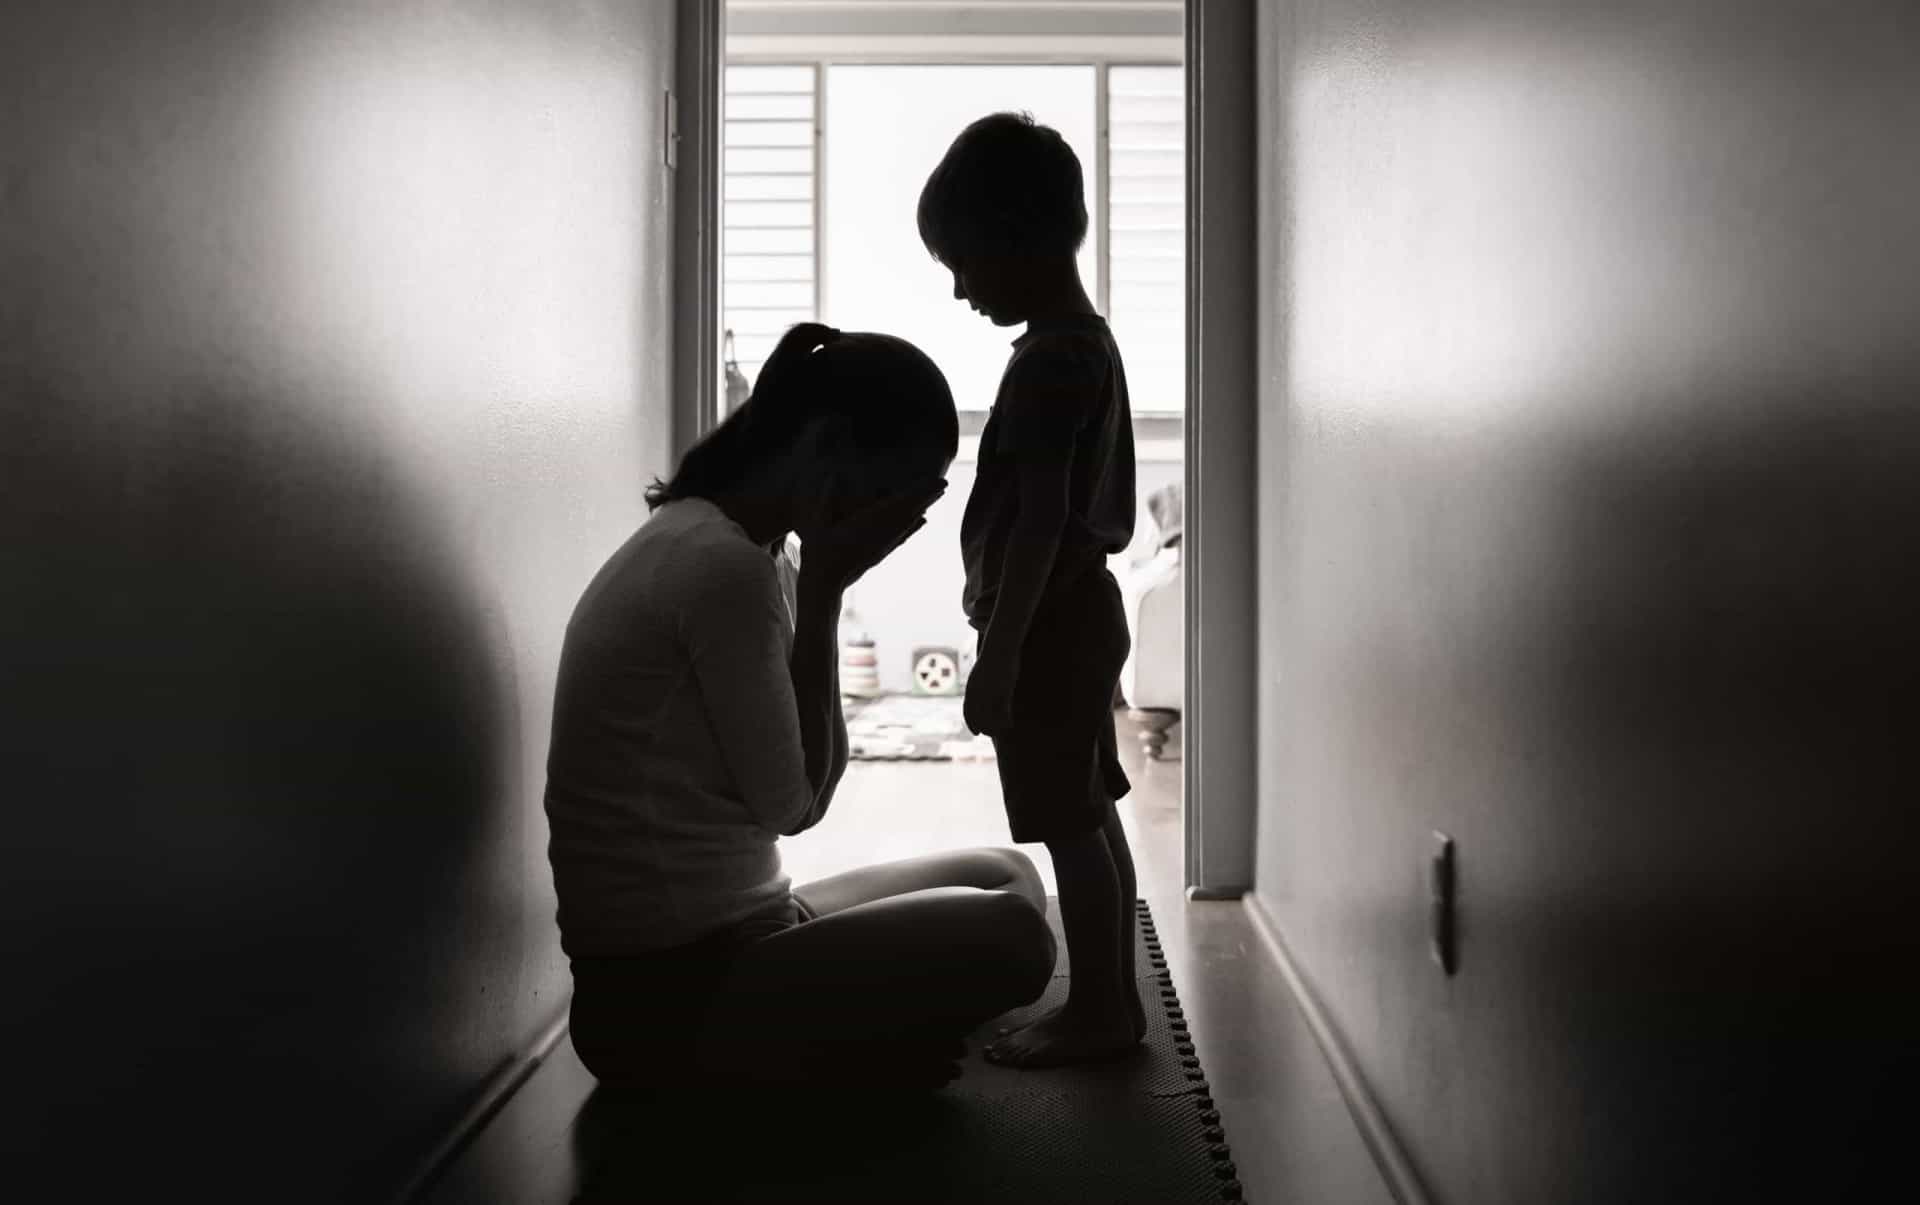 <p>A parent who struggles to manage their own anxiety will often pass it onto their child. It’s very difficult for a child to see instability in their carer, particularly when they are directly asked for help and support they don’t know how to give.</p>